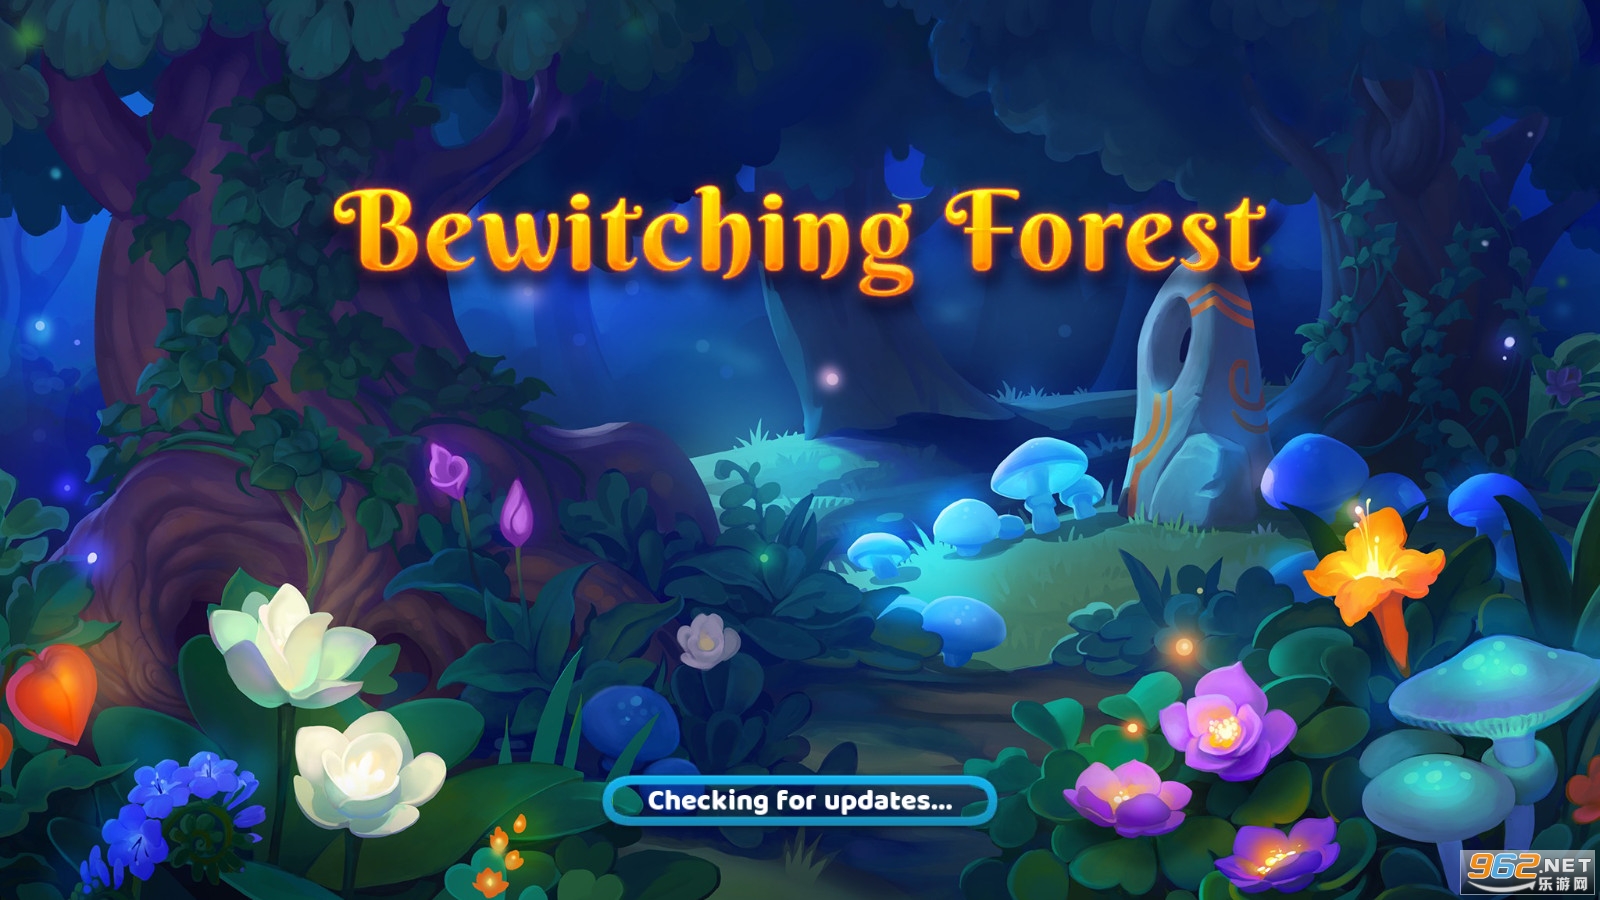 Bewitching Forest(˵ɭBewitchingForest)v0.1.742°ͼ2